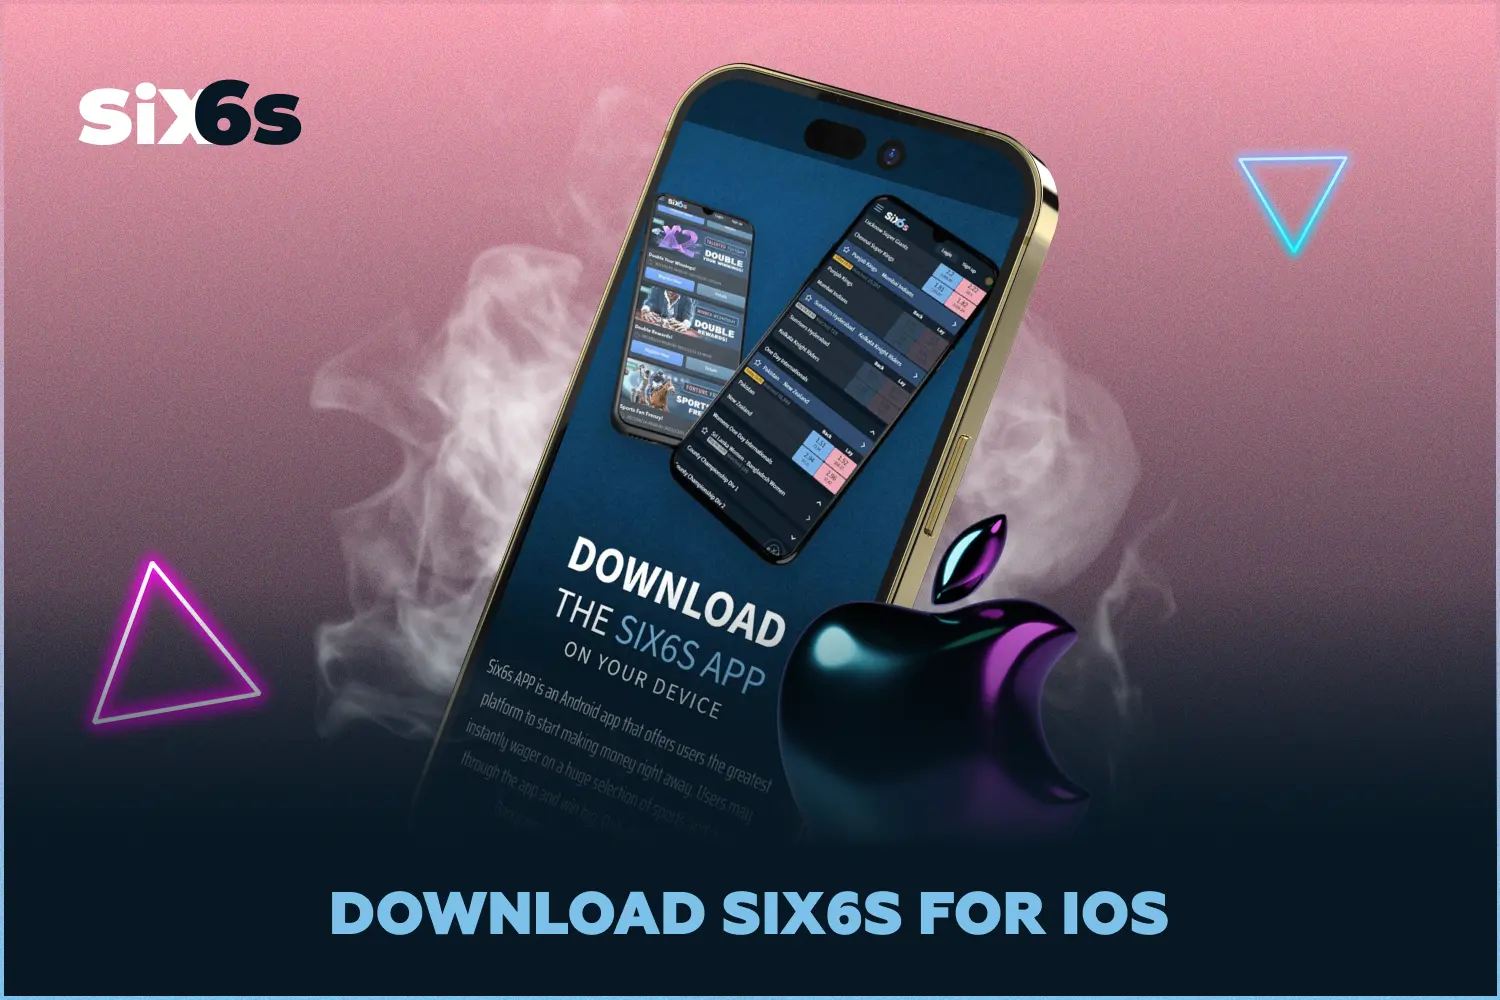 The iOS version of Six6s apps is not currently available, but users can use the Six6s mobile site from any smartphone browser